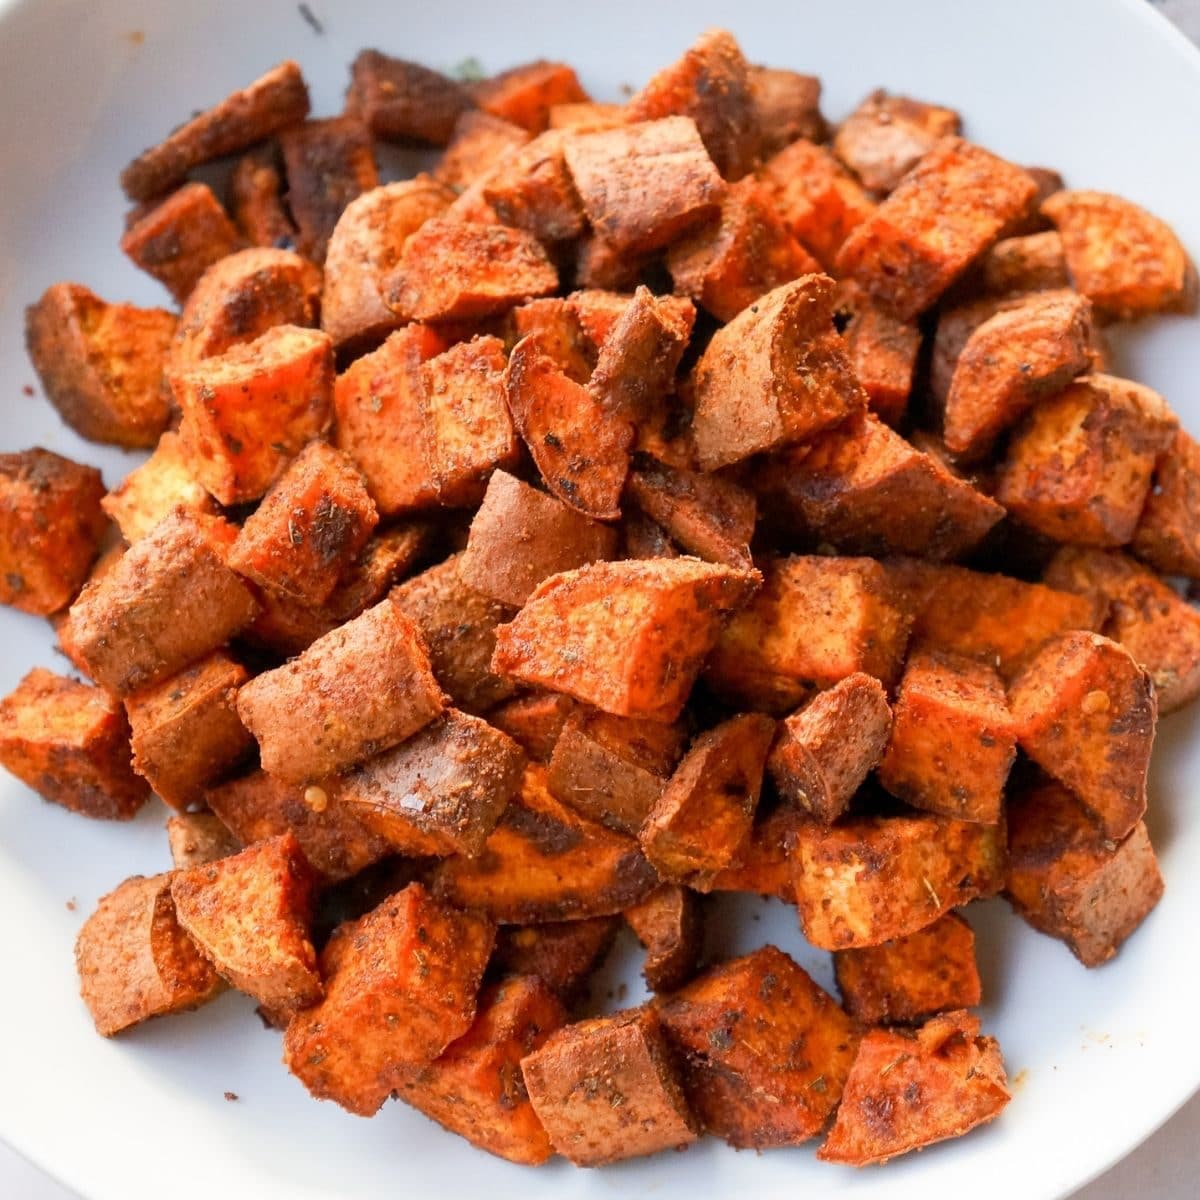 Generously spiced, bright orange sweet potatoes on a white background in a white bowl.